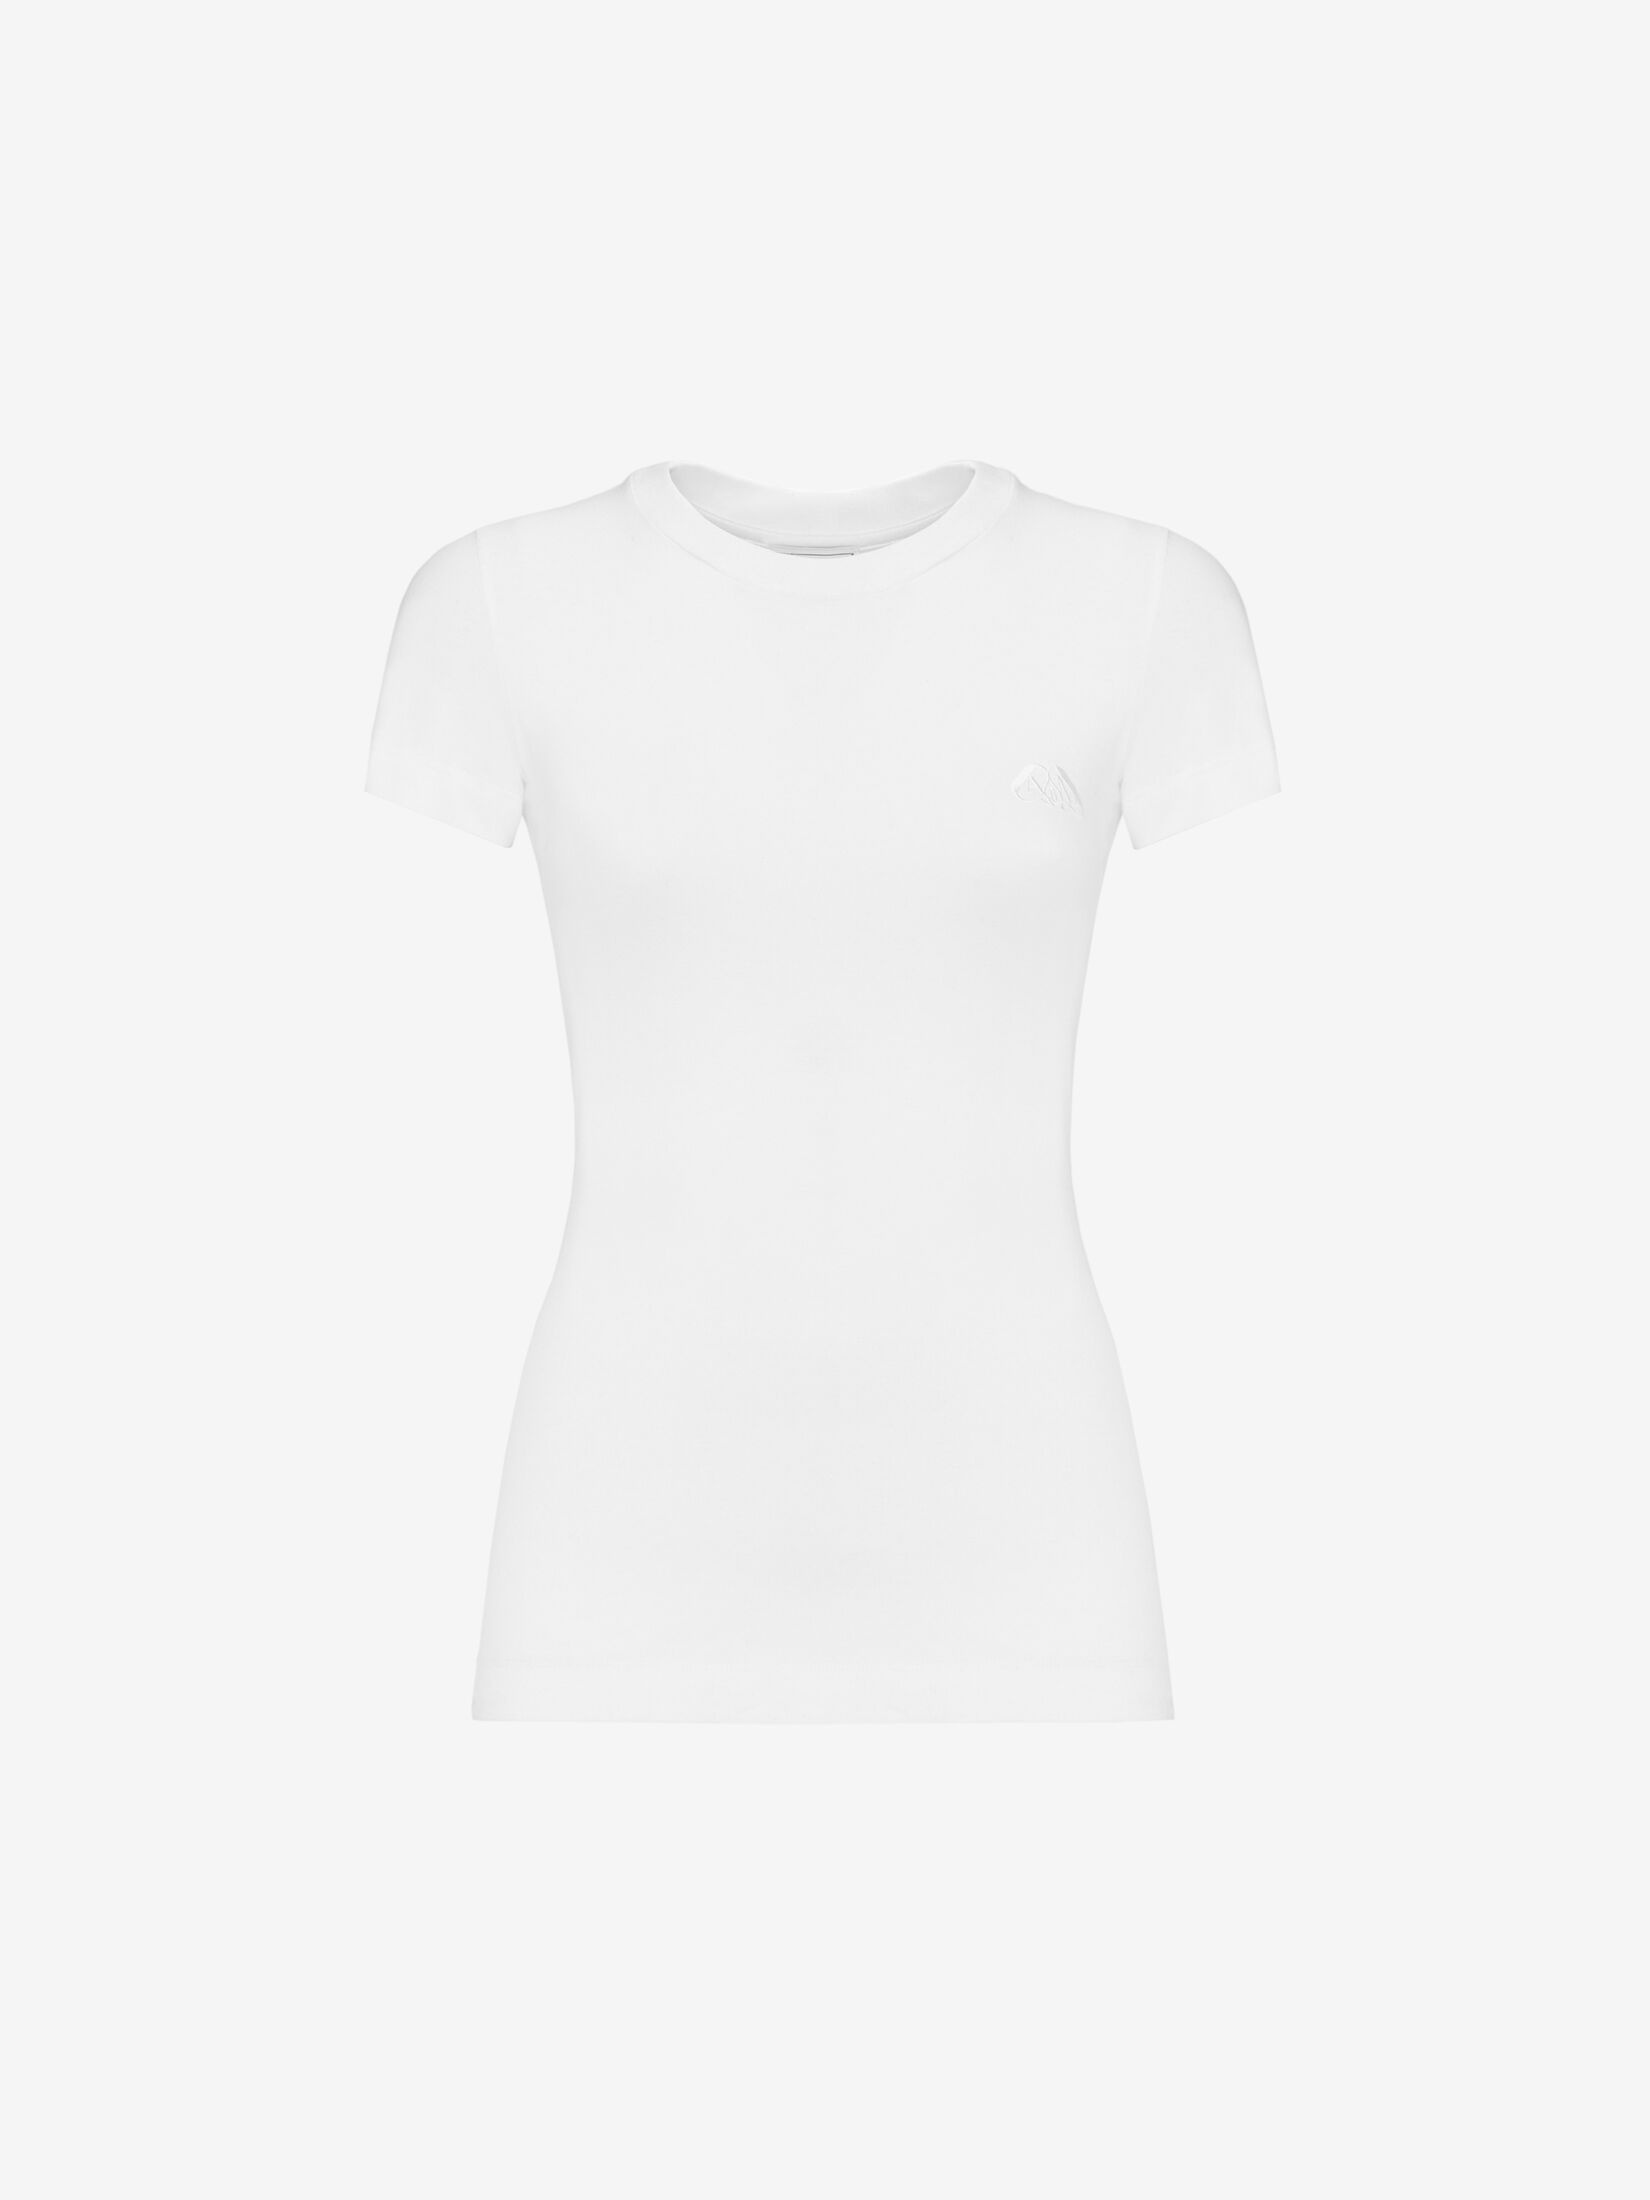 Women's Seal Logo Fitted T-shirt in Optic White - 1